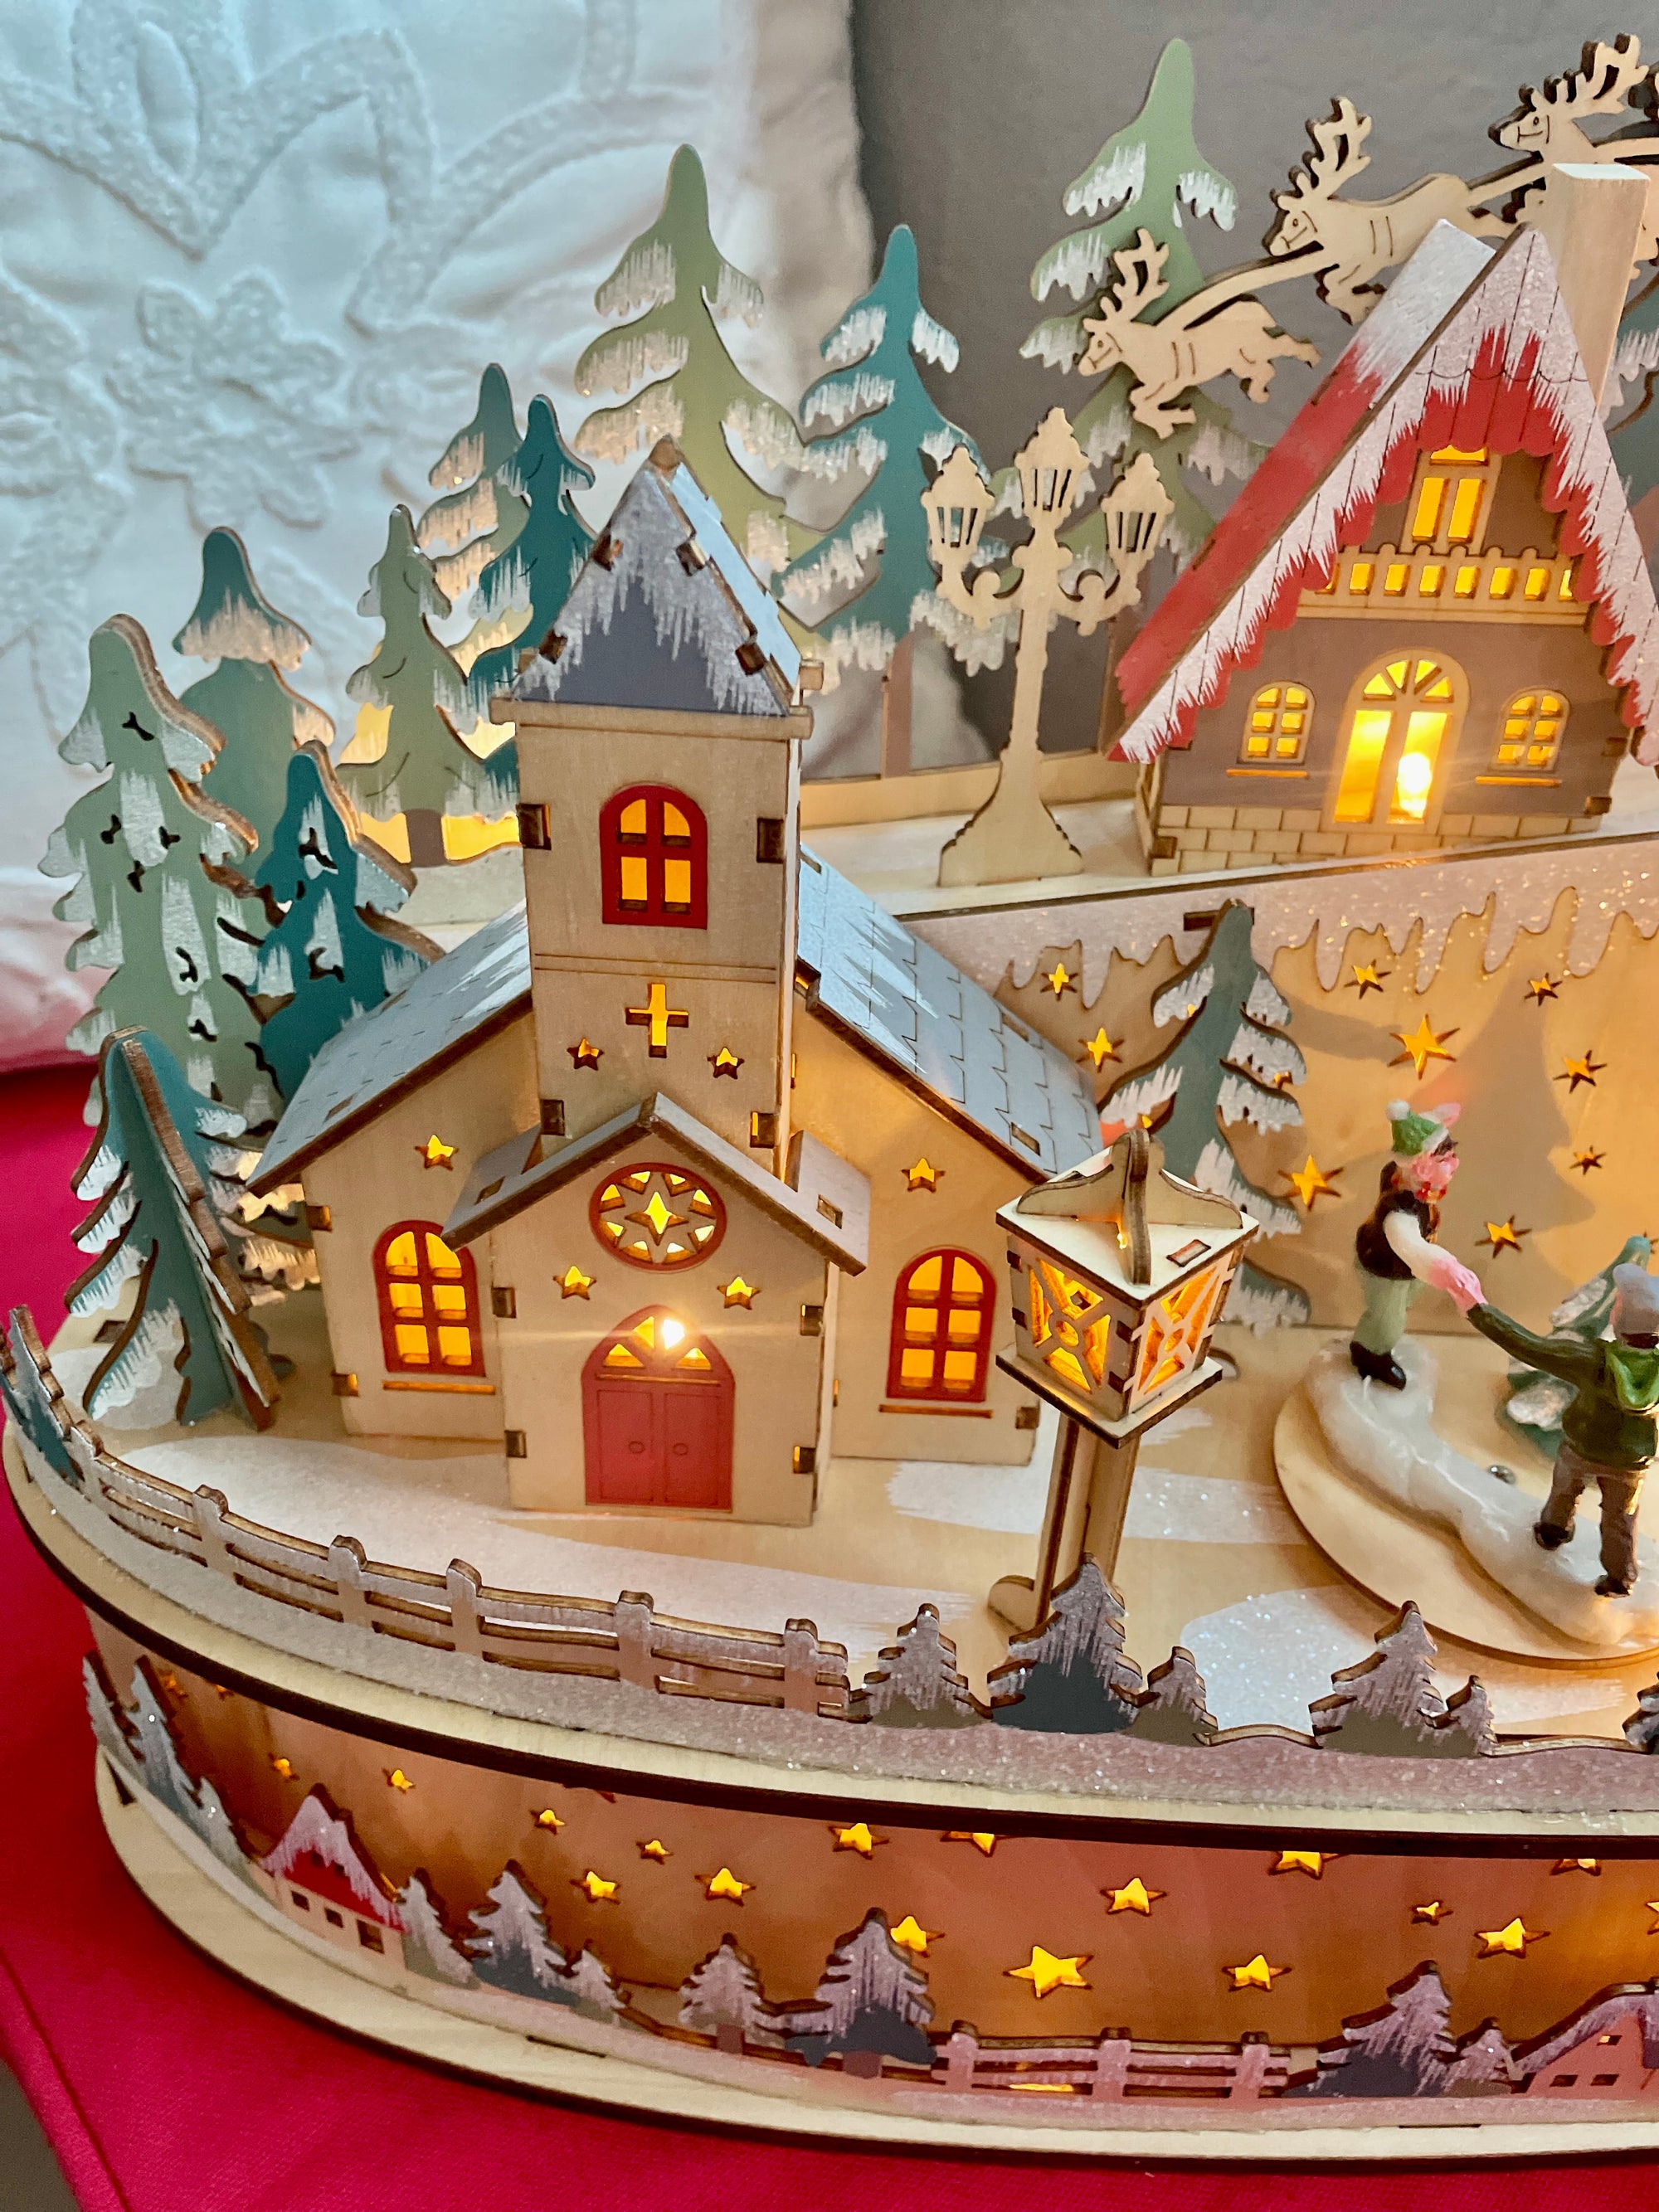 The Canton Christmas Shop Kurt Adler 11.2" Battery Operated Light Up Christmas Village with Santa in living room